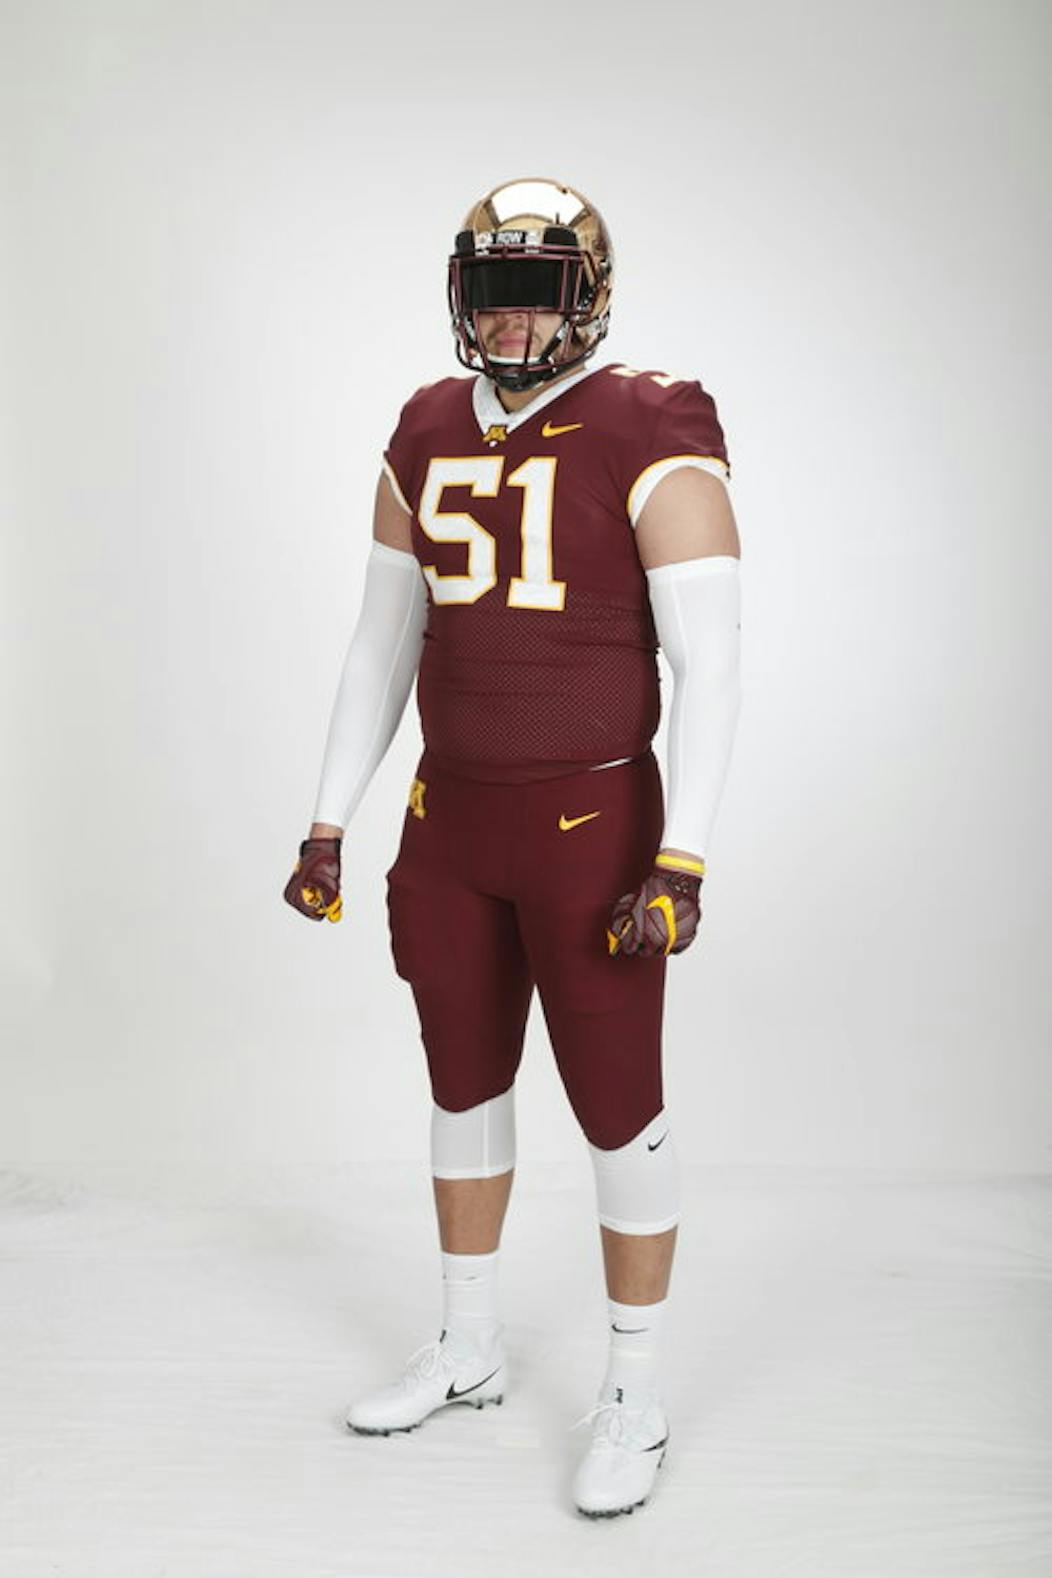 Gophers Reveal New All-Black 'Dark Mode' Uniforms for Saturday Night